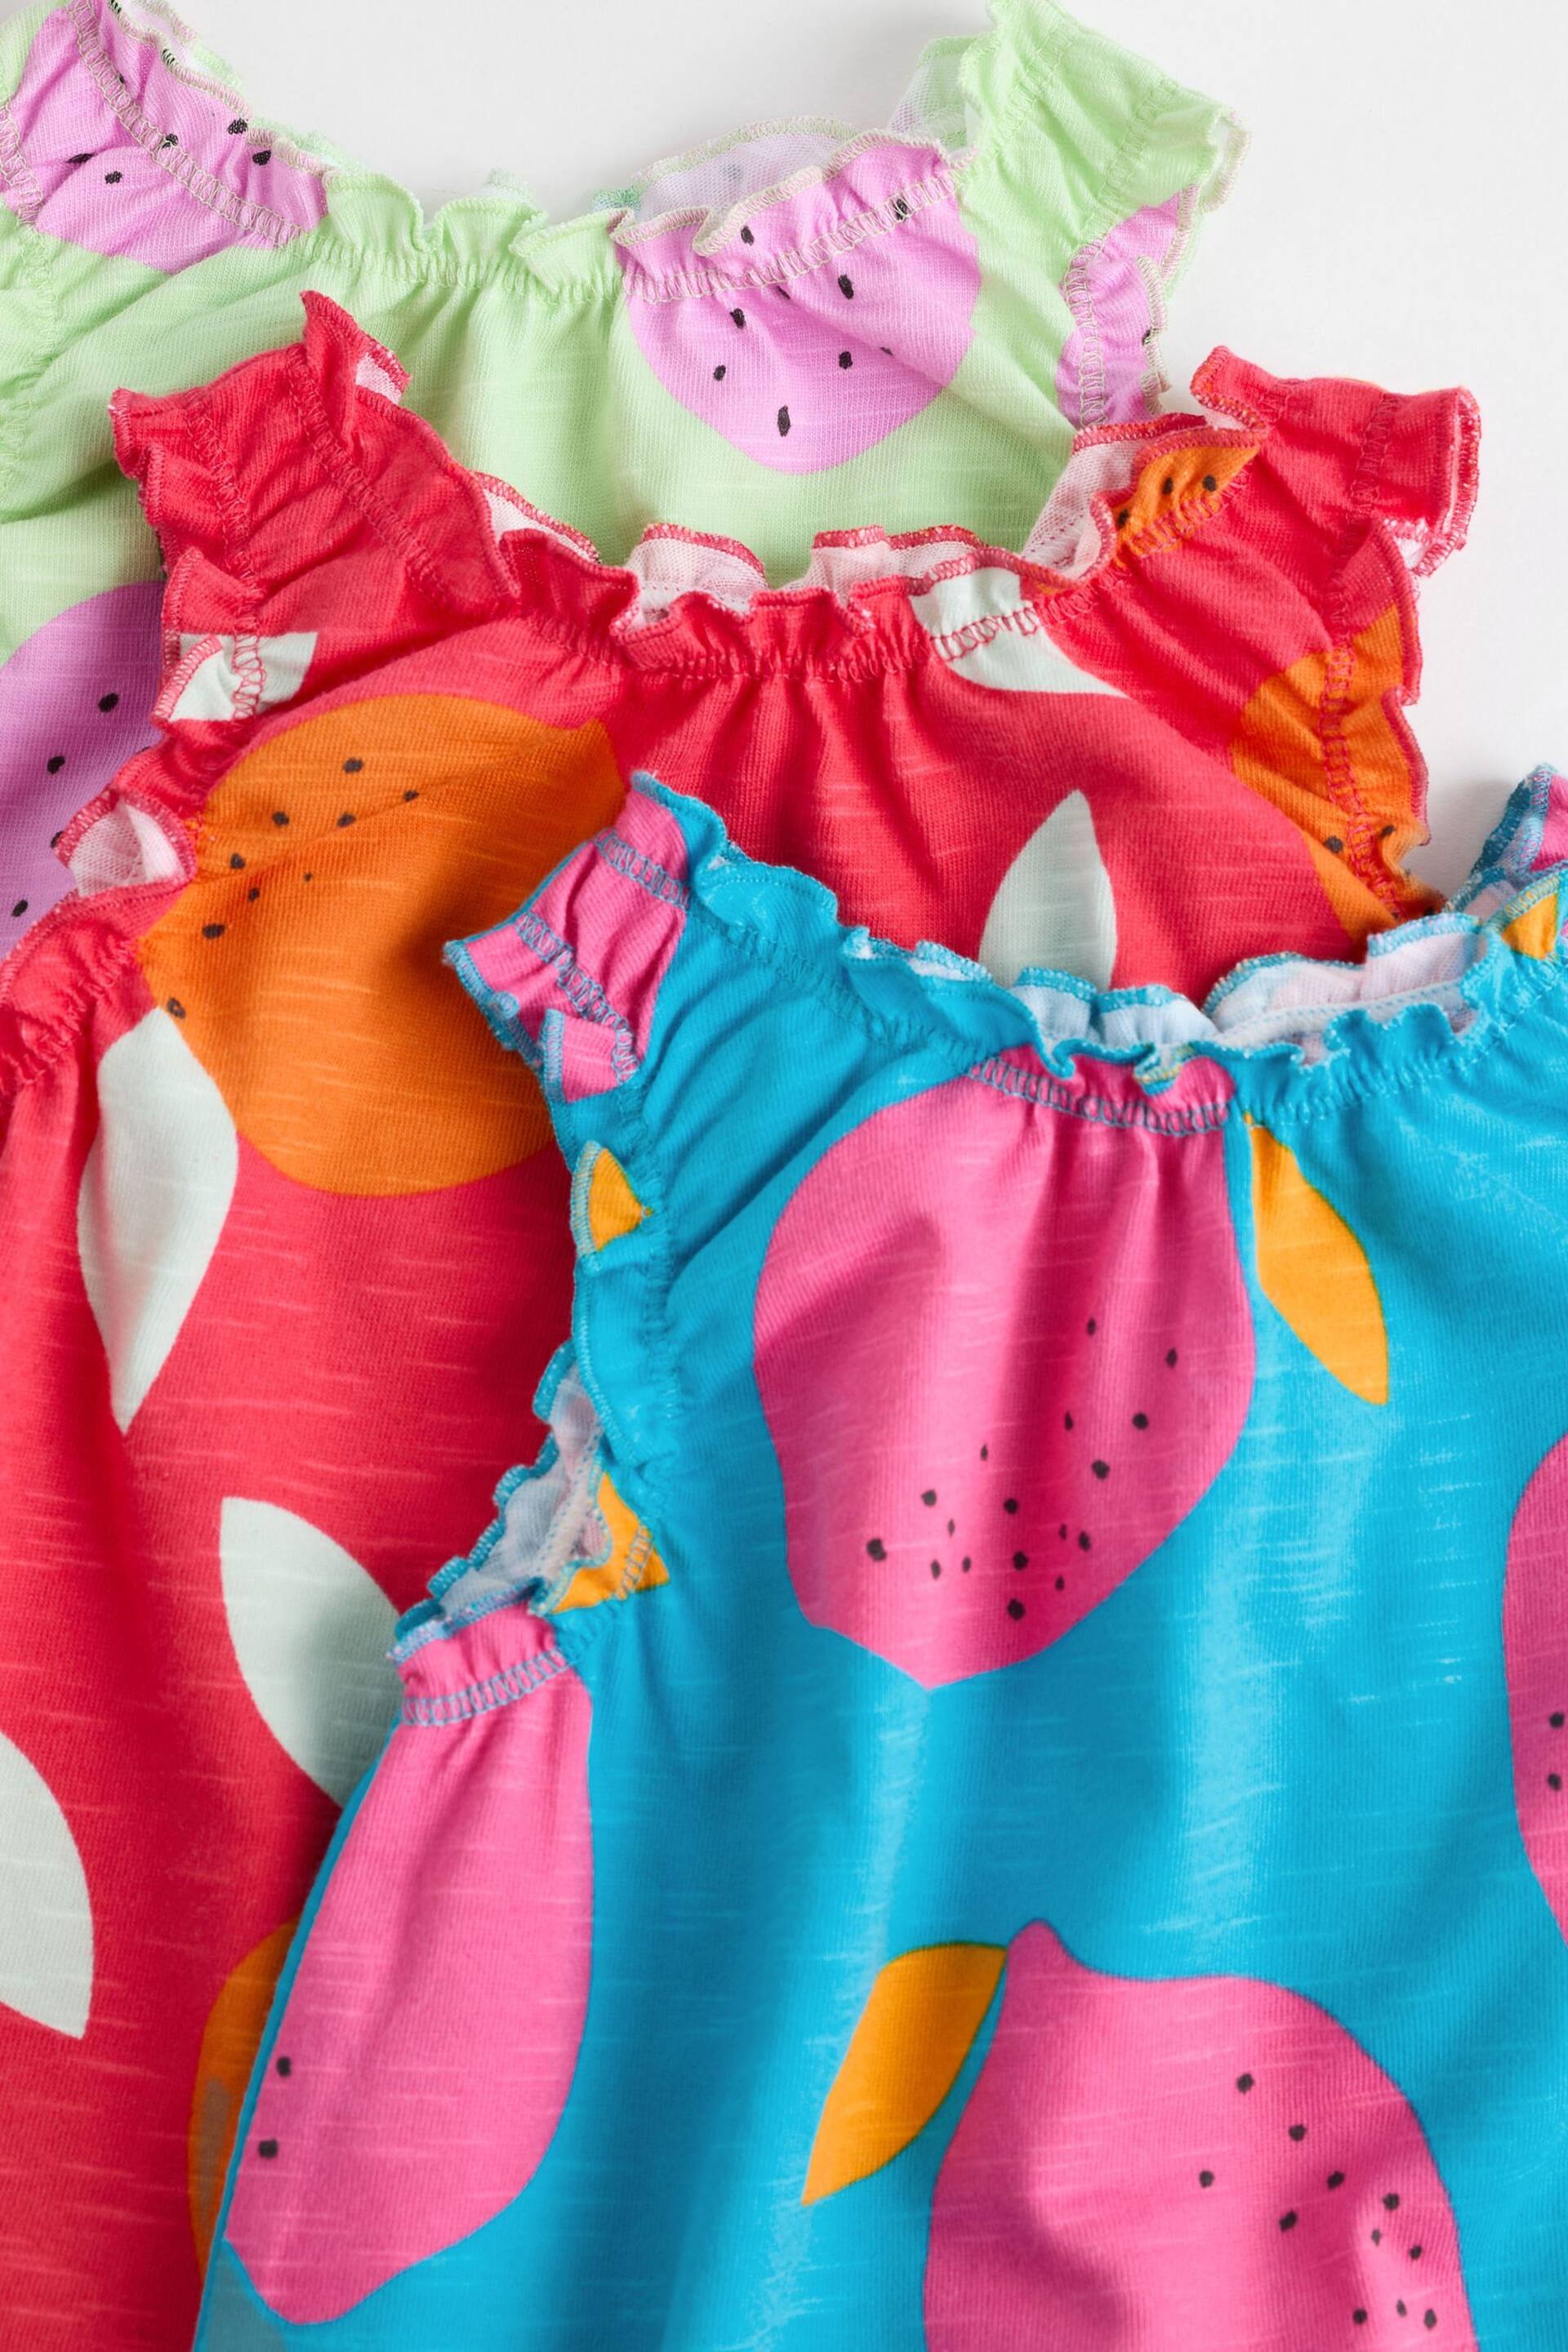 Multi Bright Fruit Baby Vest Rompers 3 Pack - Image 5 of 8